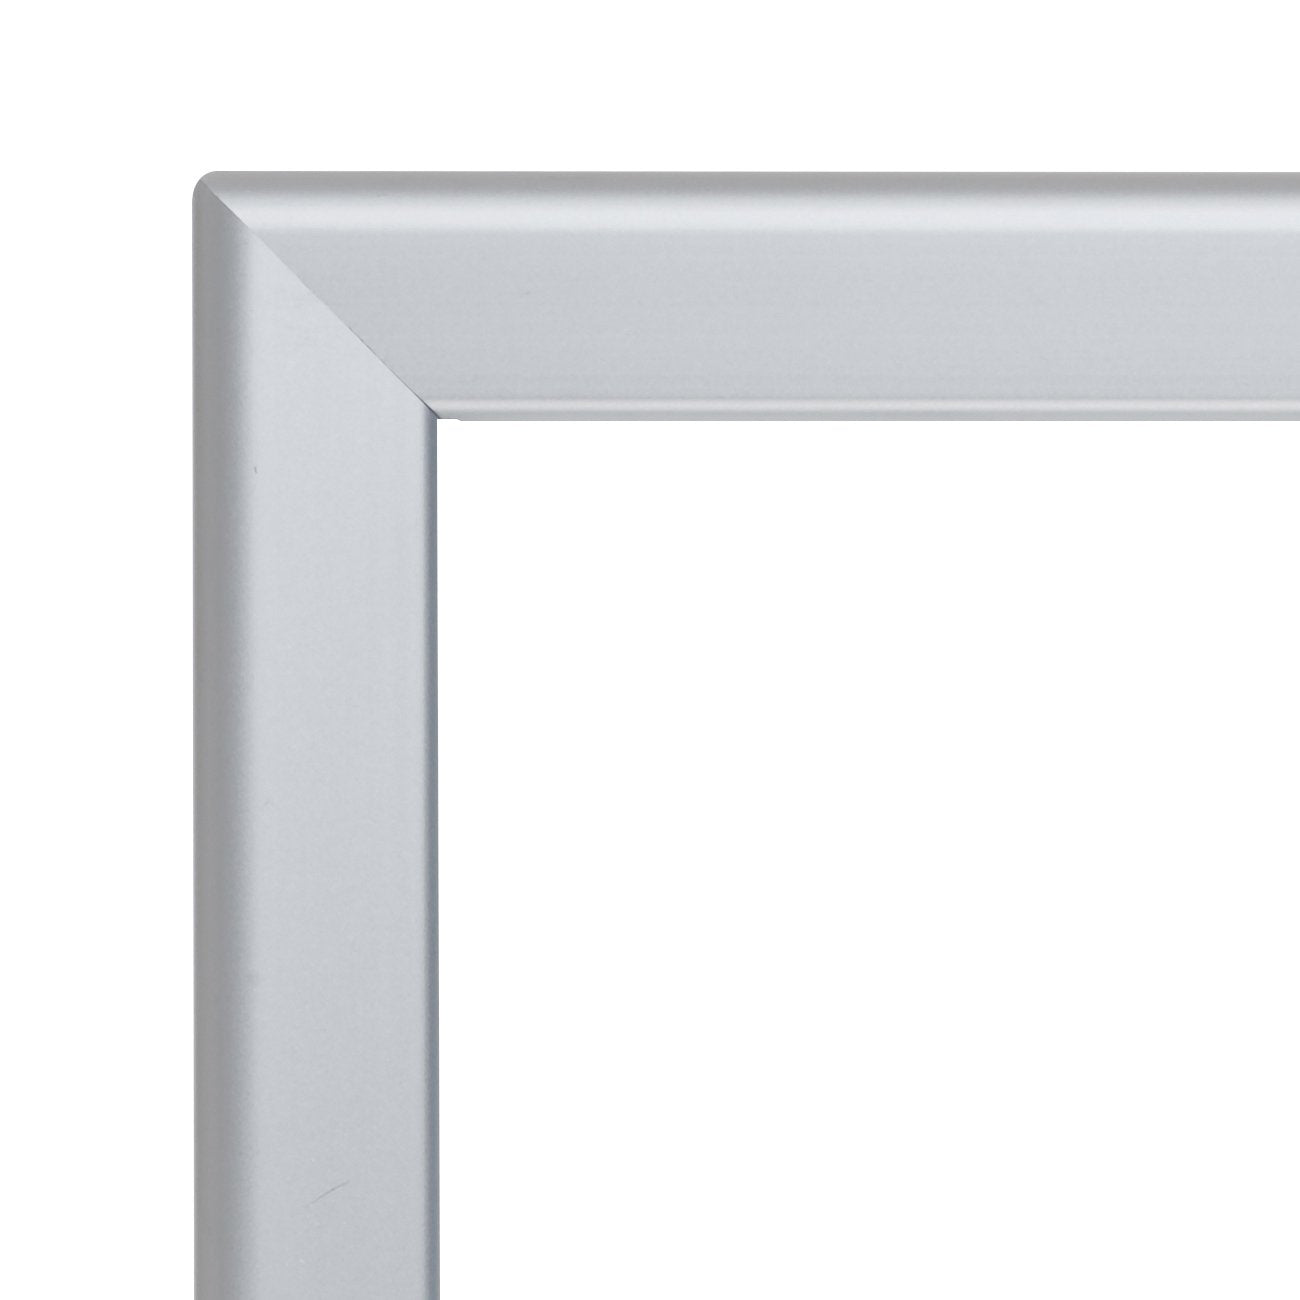 Snap Frame, 32 mm profile, silver